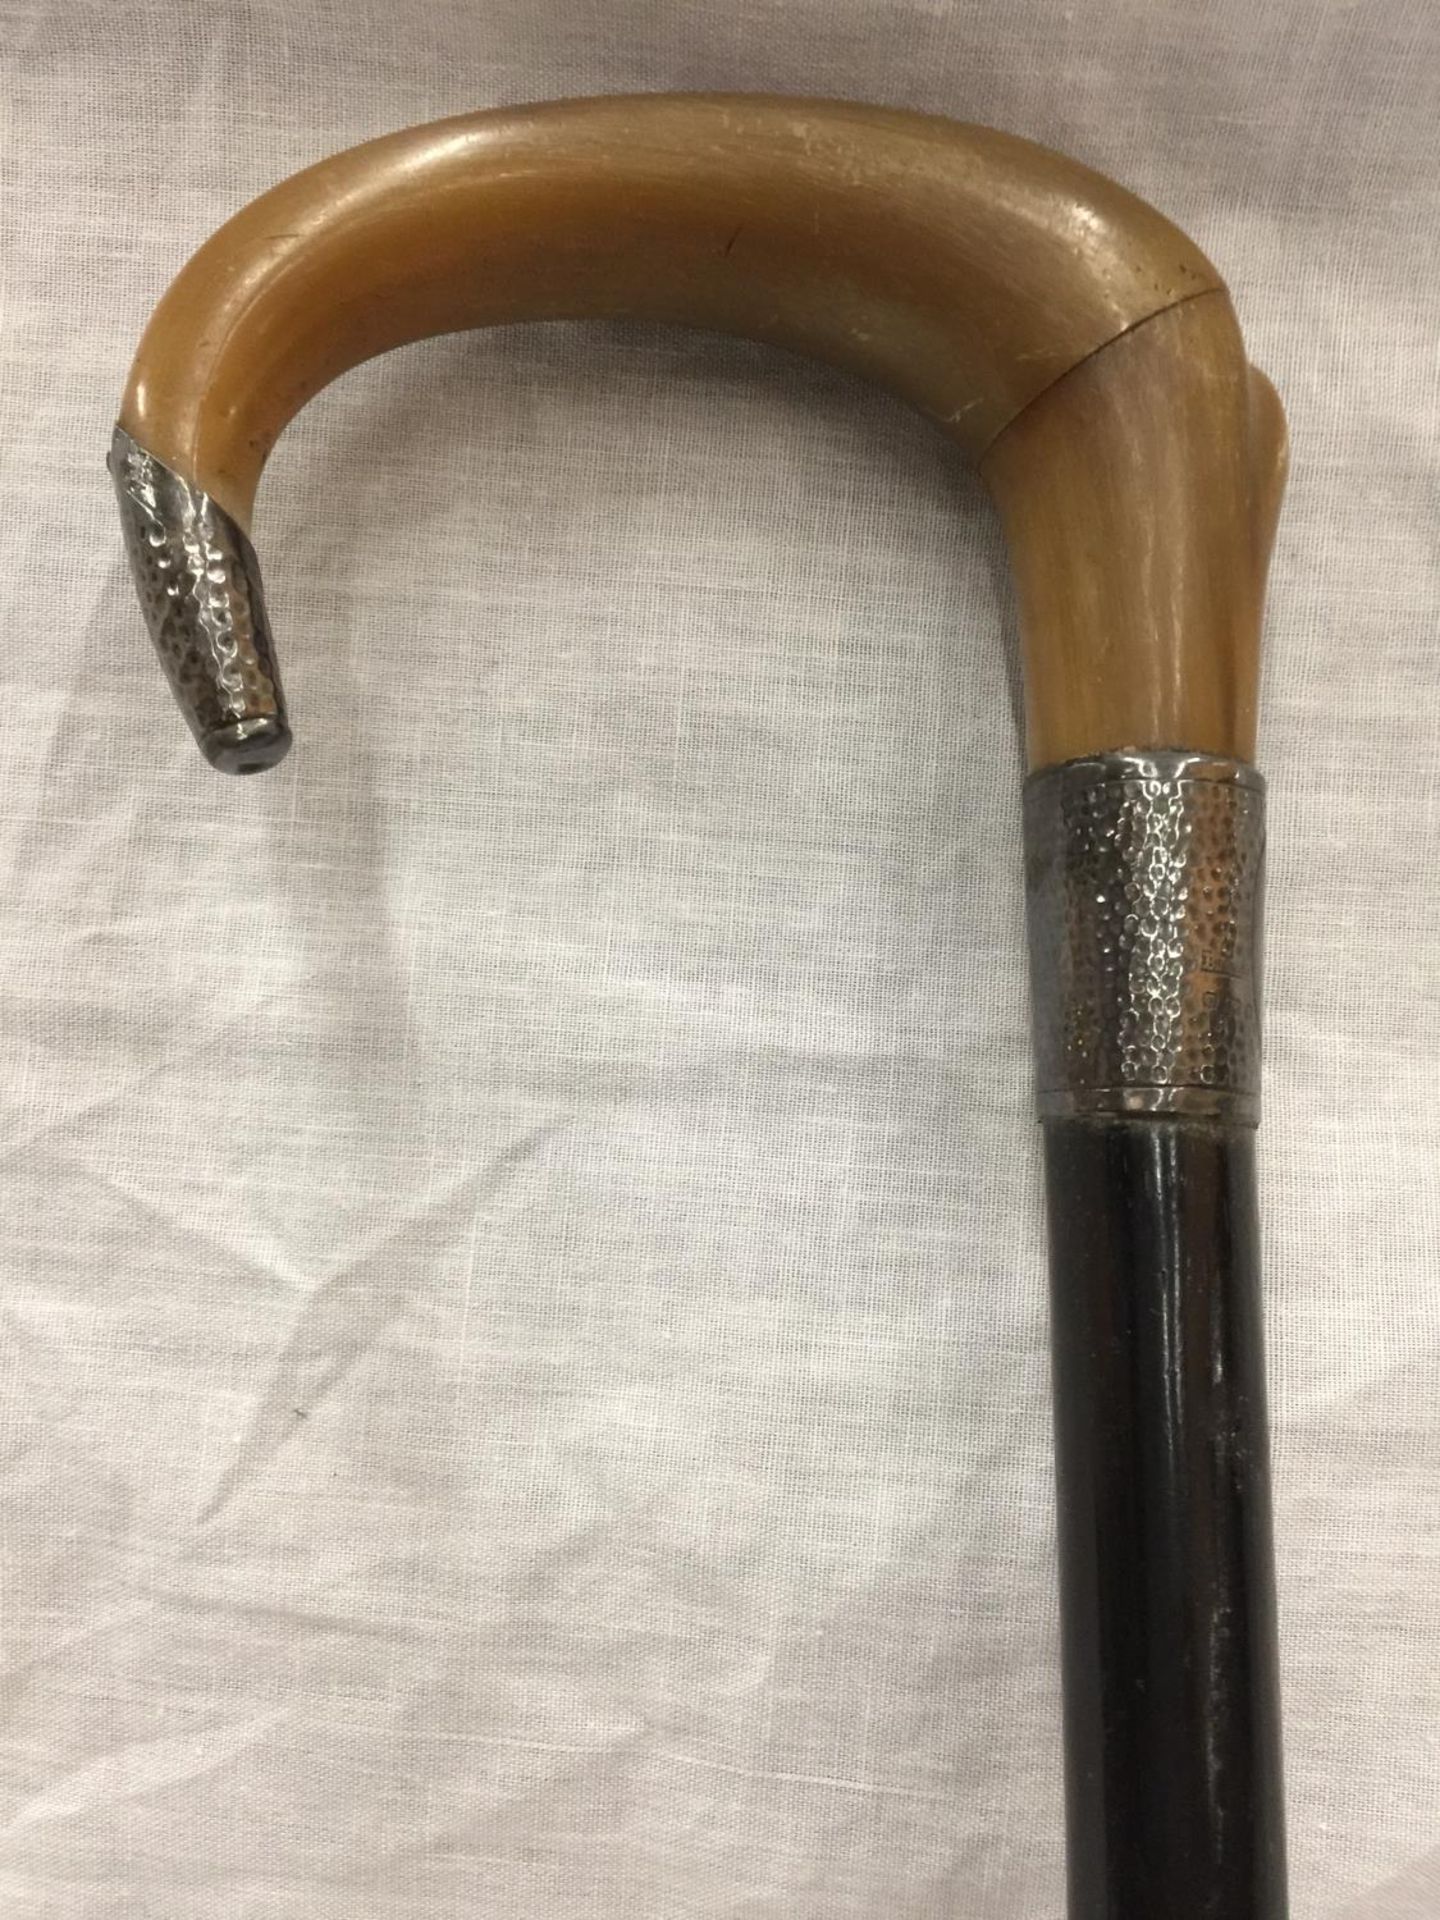 A WALKING CANE WITH SILVER BAND AND A HORN HANDLE - Image 2 of 2